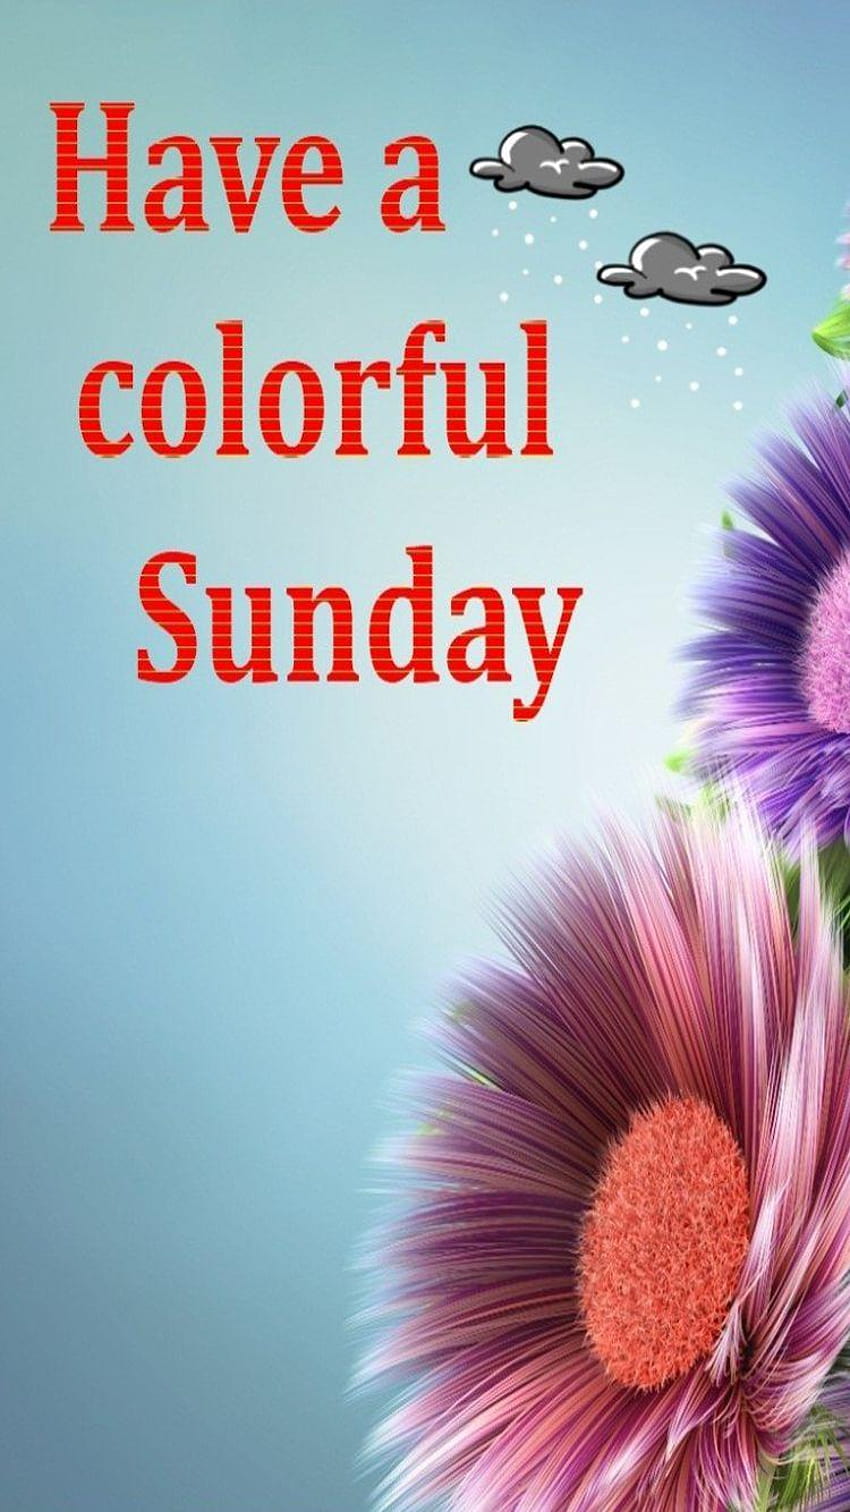 Happy colorful sunday iphone 5s high resolution, happy sunday HD ...